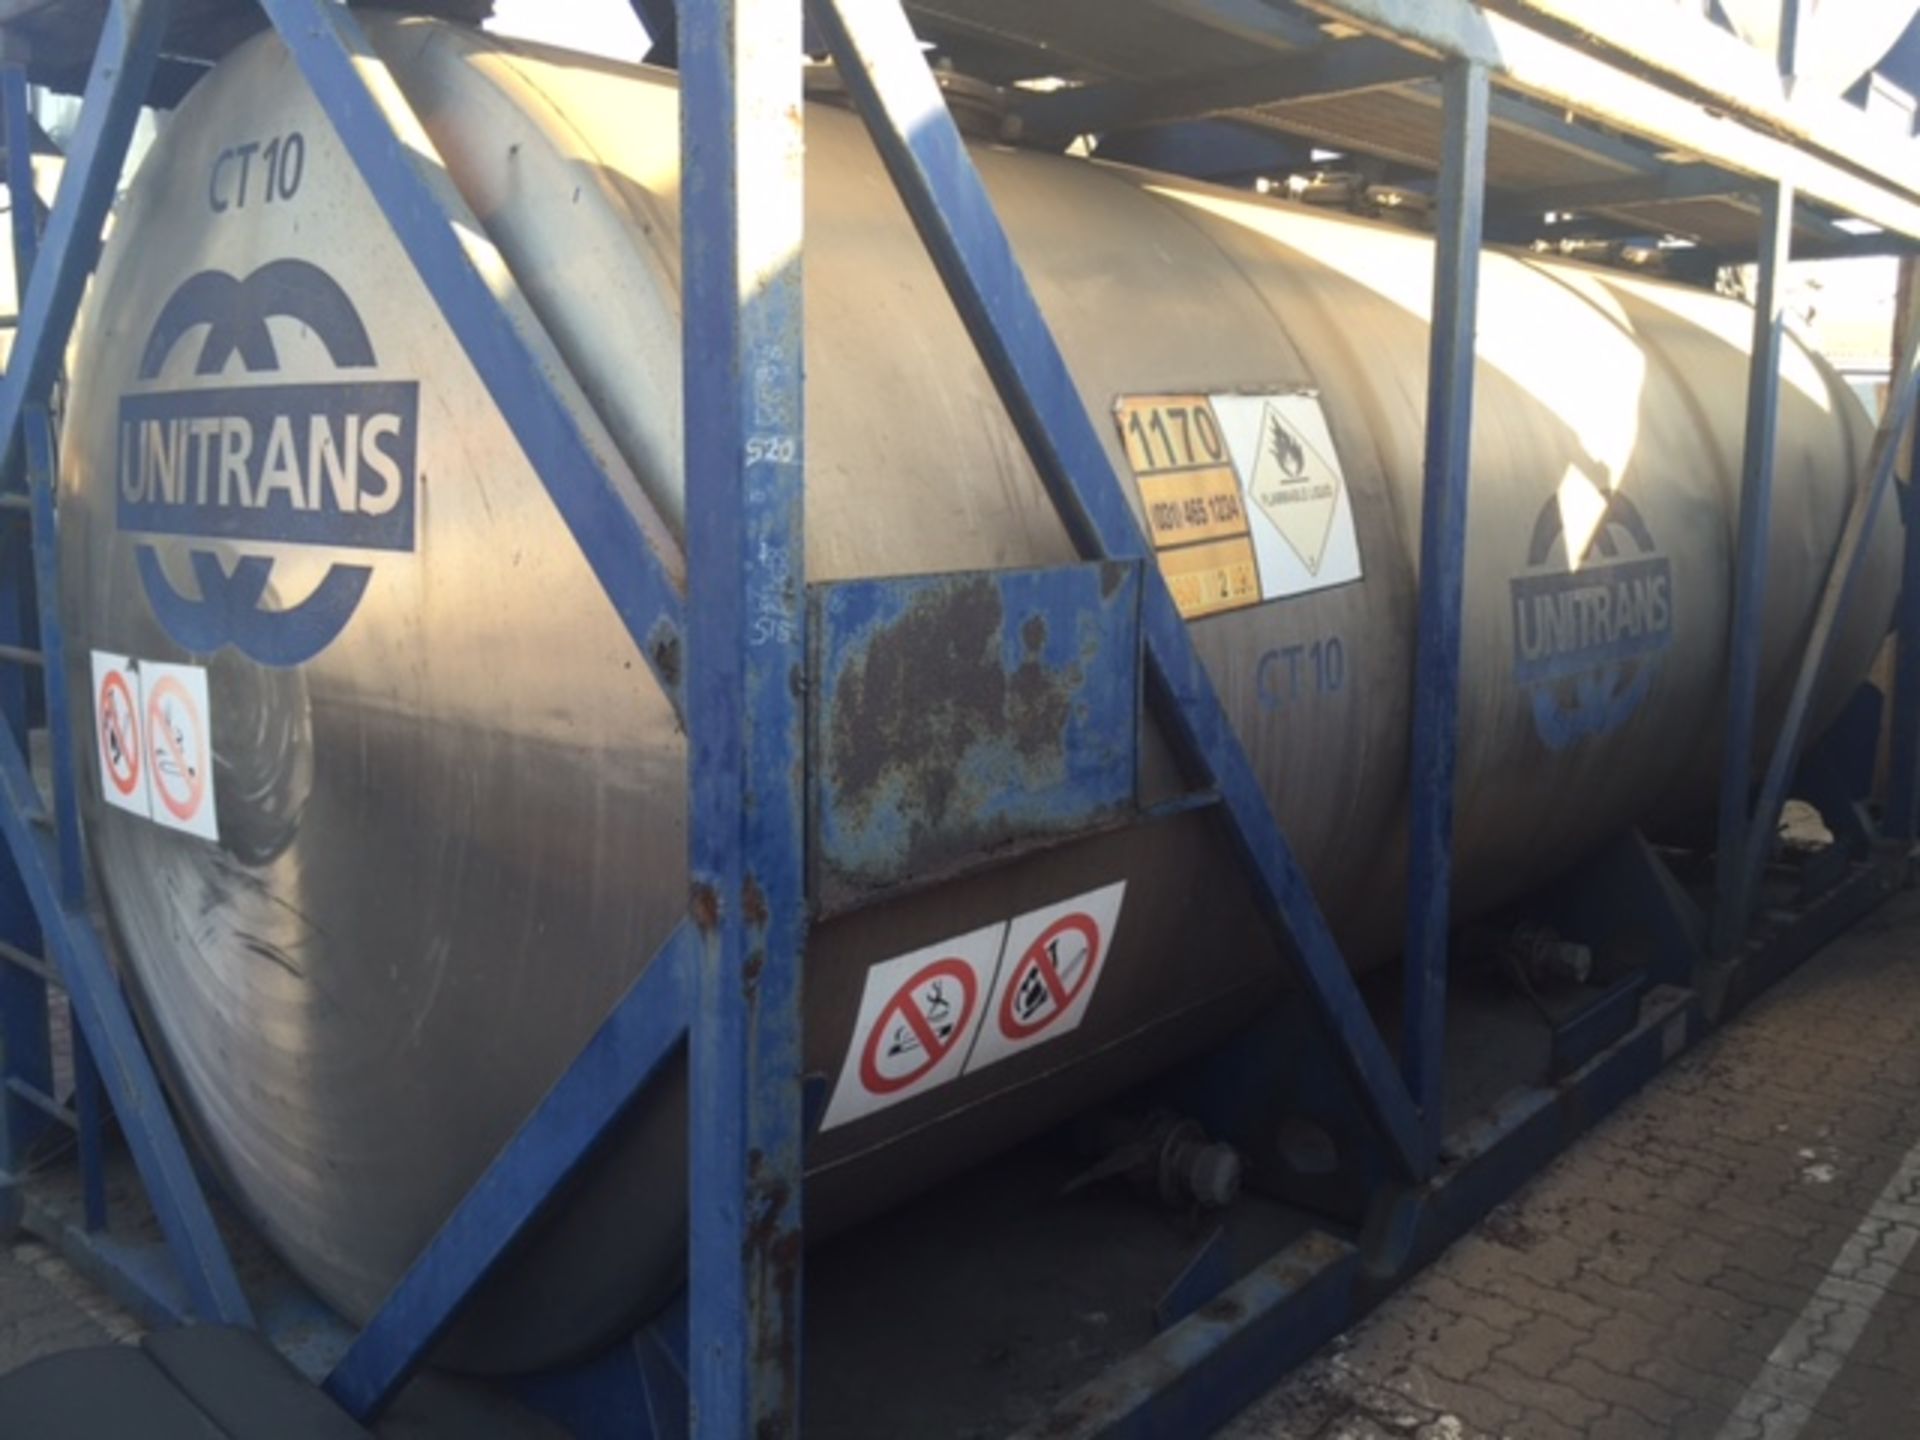 STAINLESS STEEL TANK WITH FRAME- - (CT10) - LOCATION KZN - Subject to Confirmation - Image 3 of 3